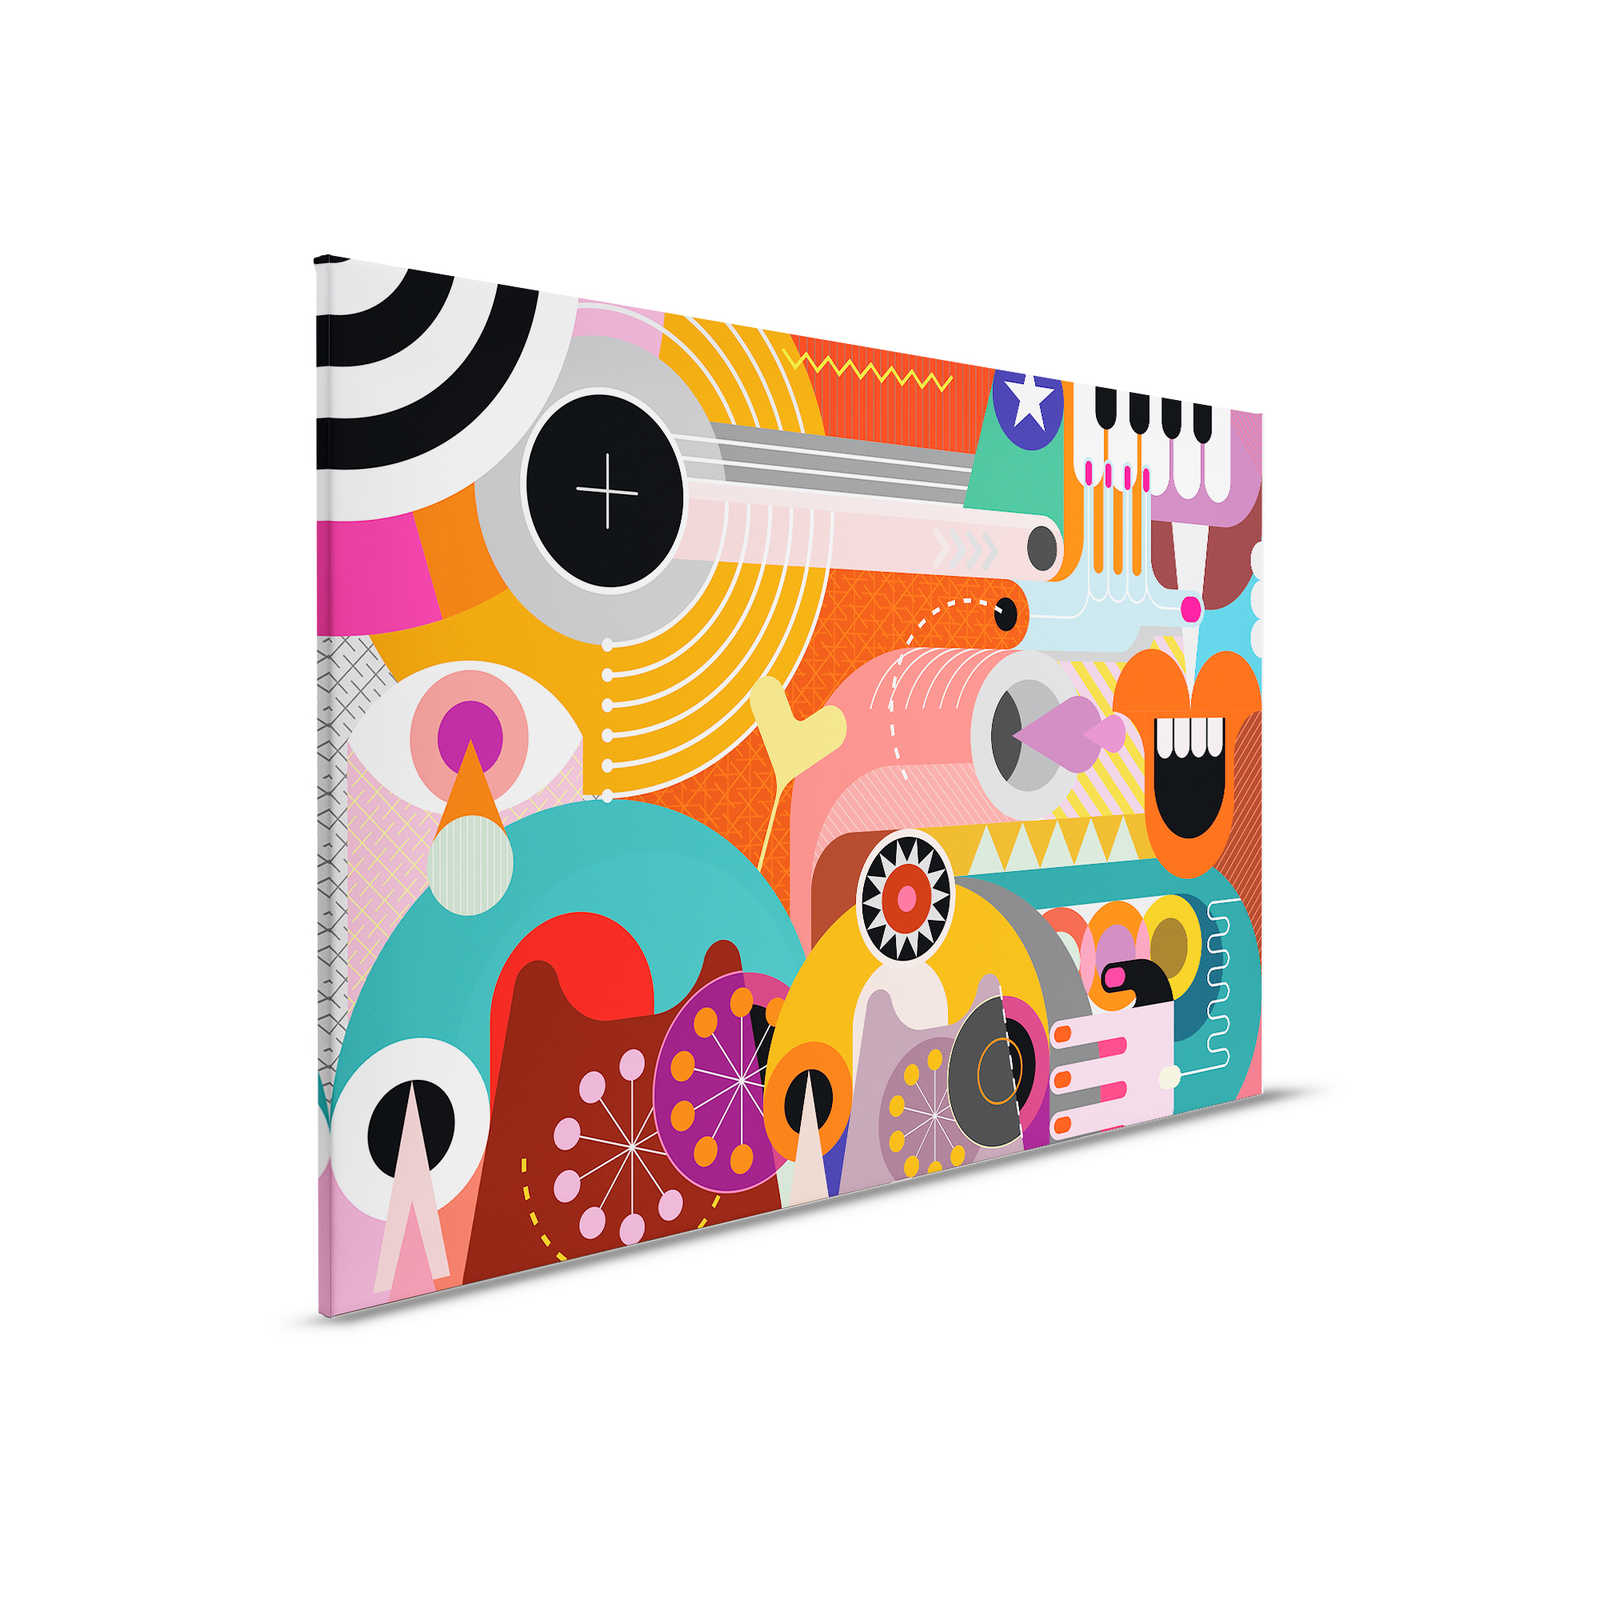         Canvas painting Pop Style Art Abstract Faces - 0,90 m x 0,60 m
    